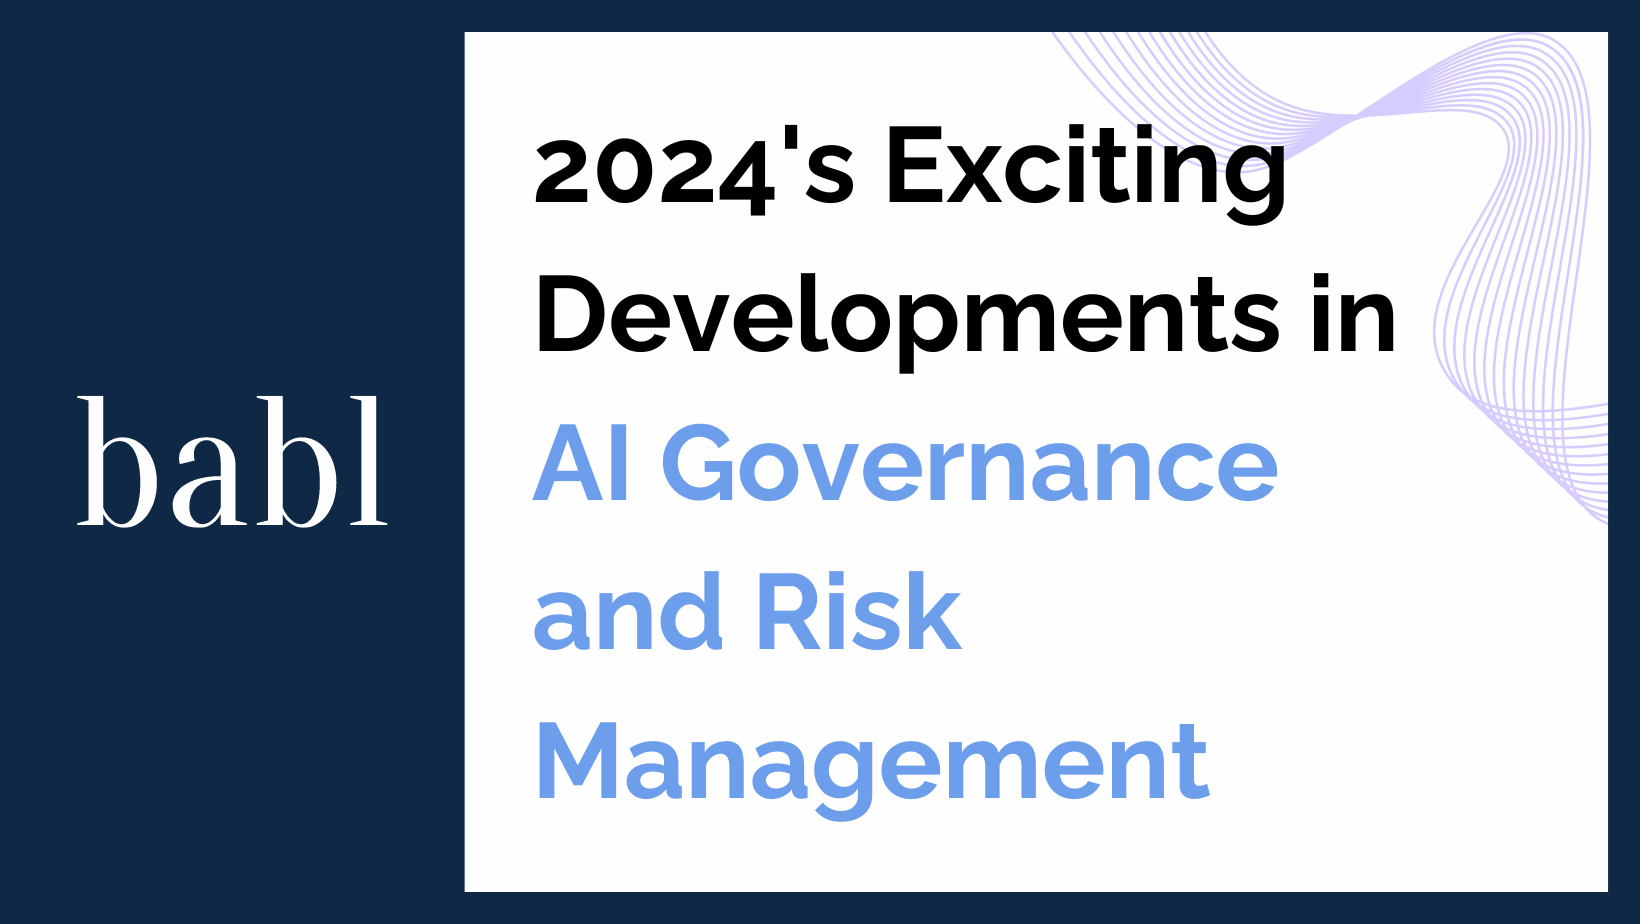 2024’s Exciting Developments in AI Governance and Risk Management